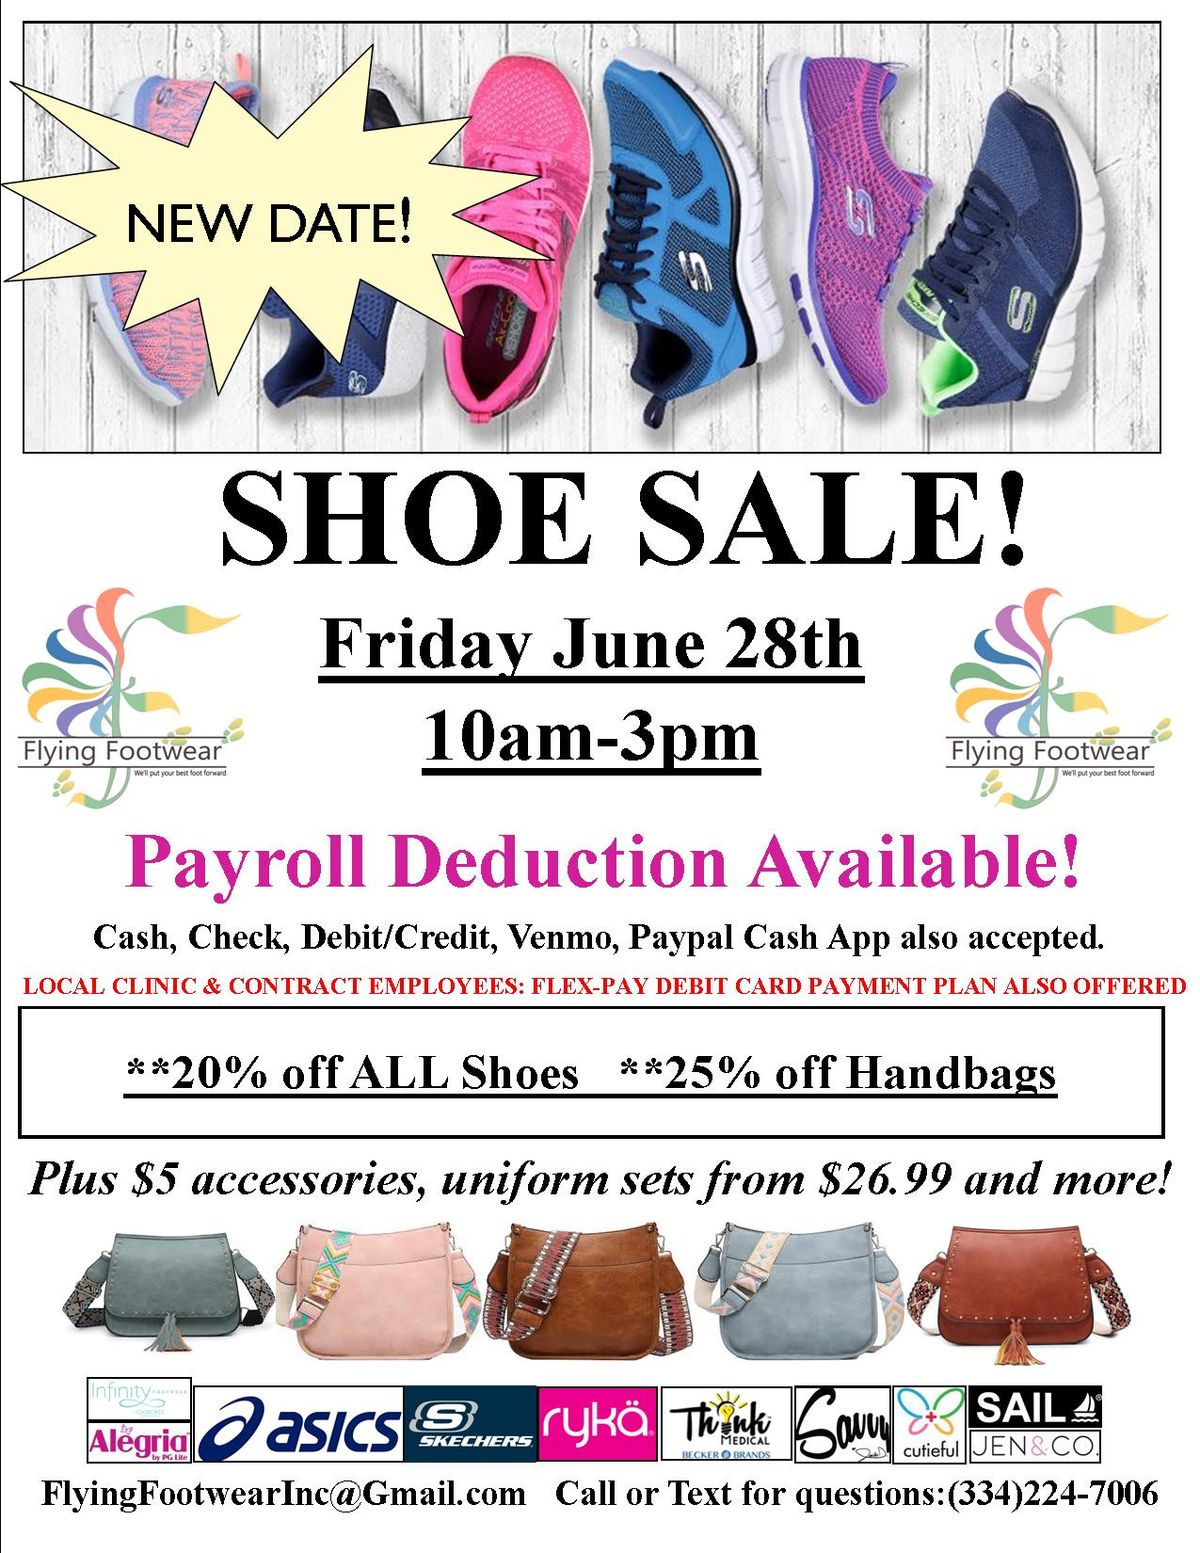 NEW DATE! ---Shoe Sale at Enterprise Health and Rehab